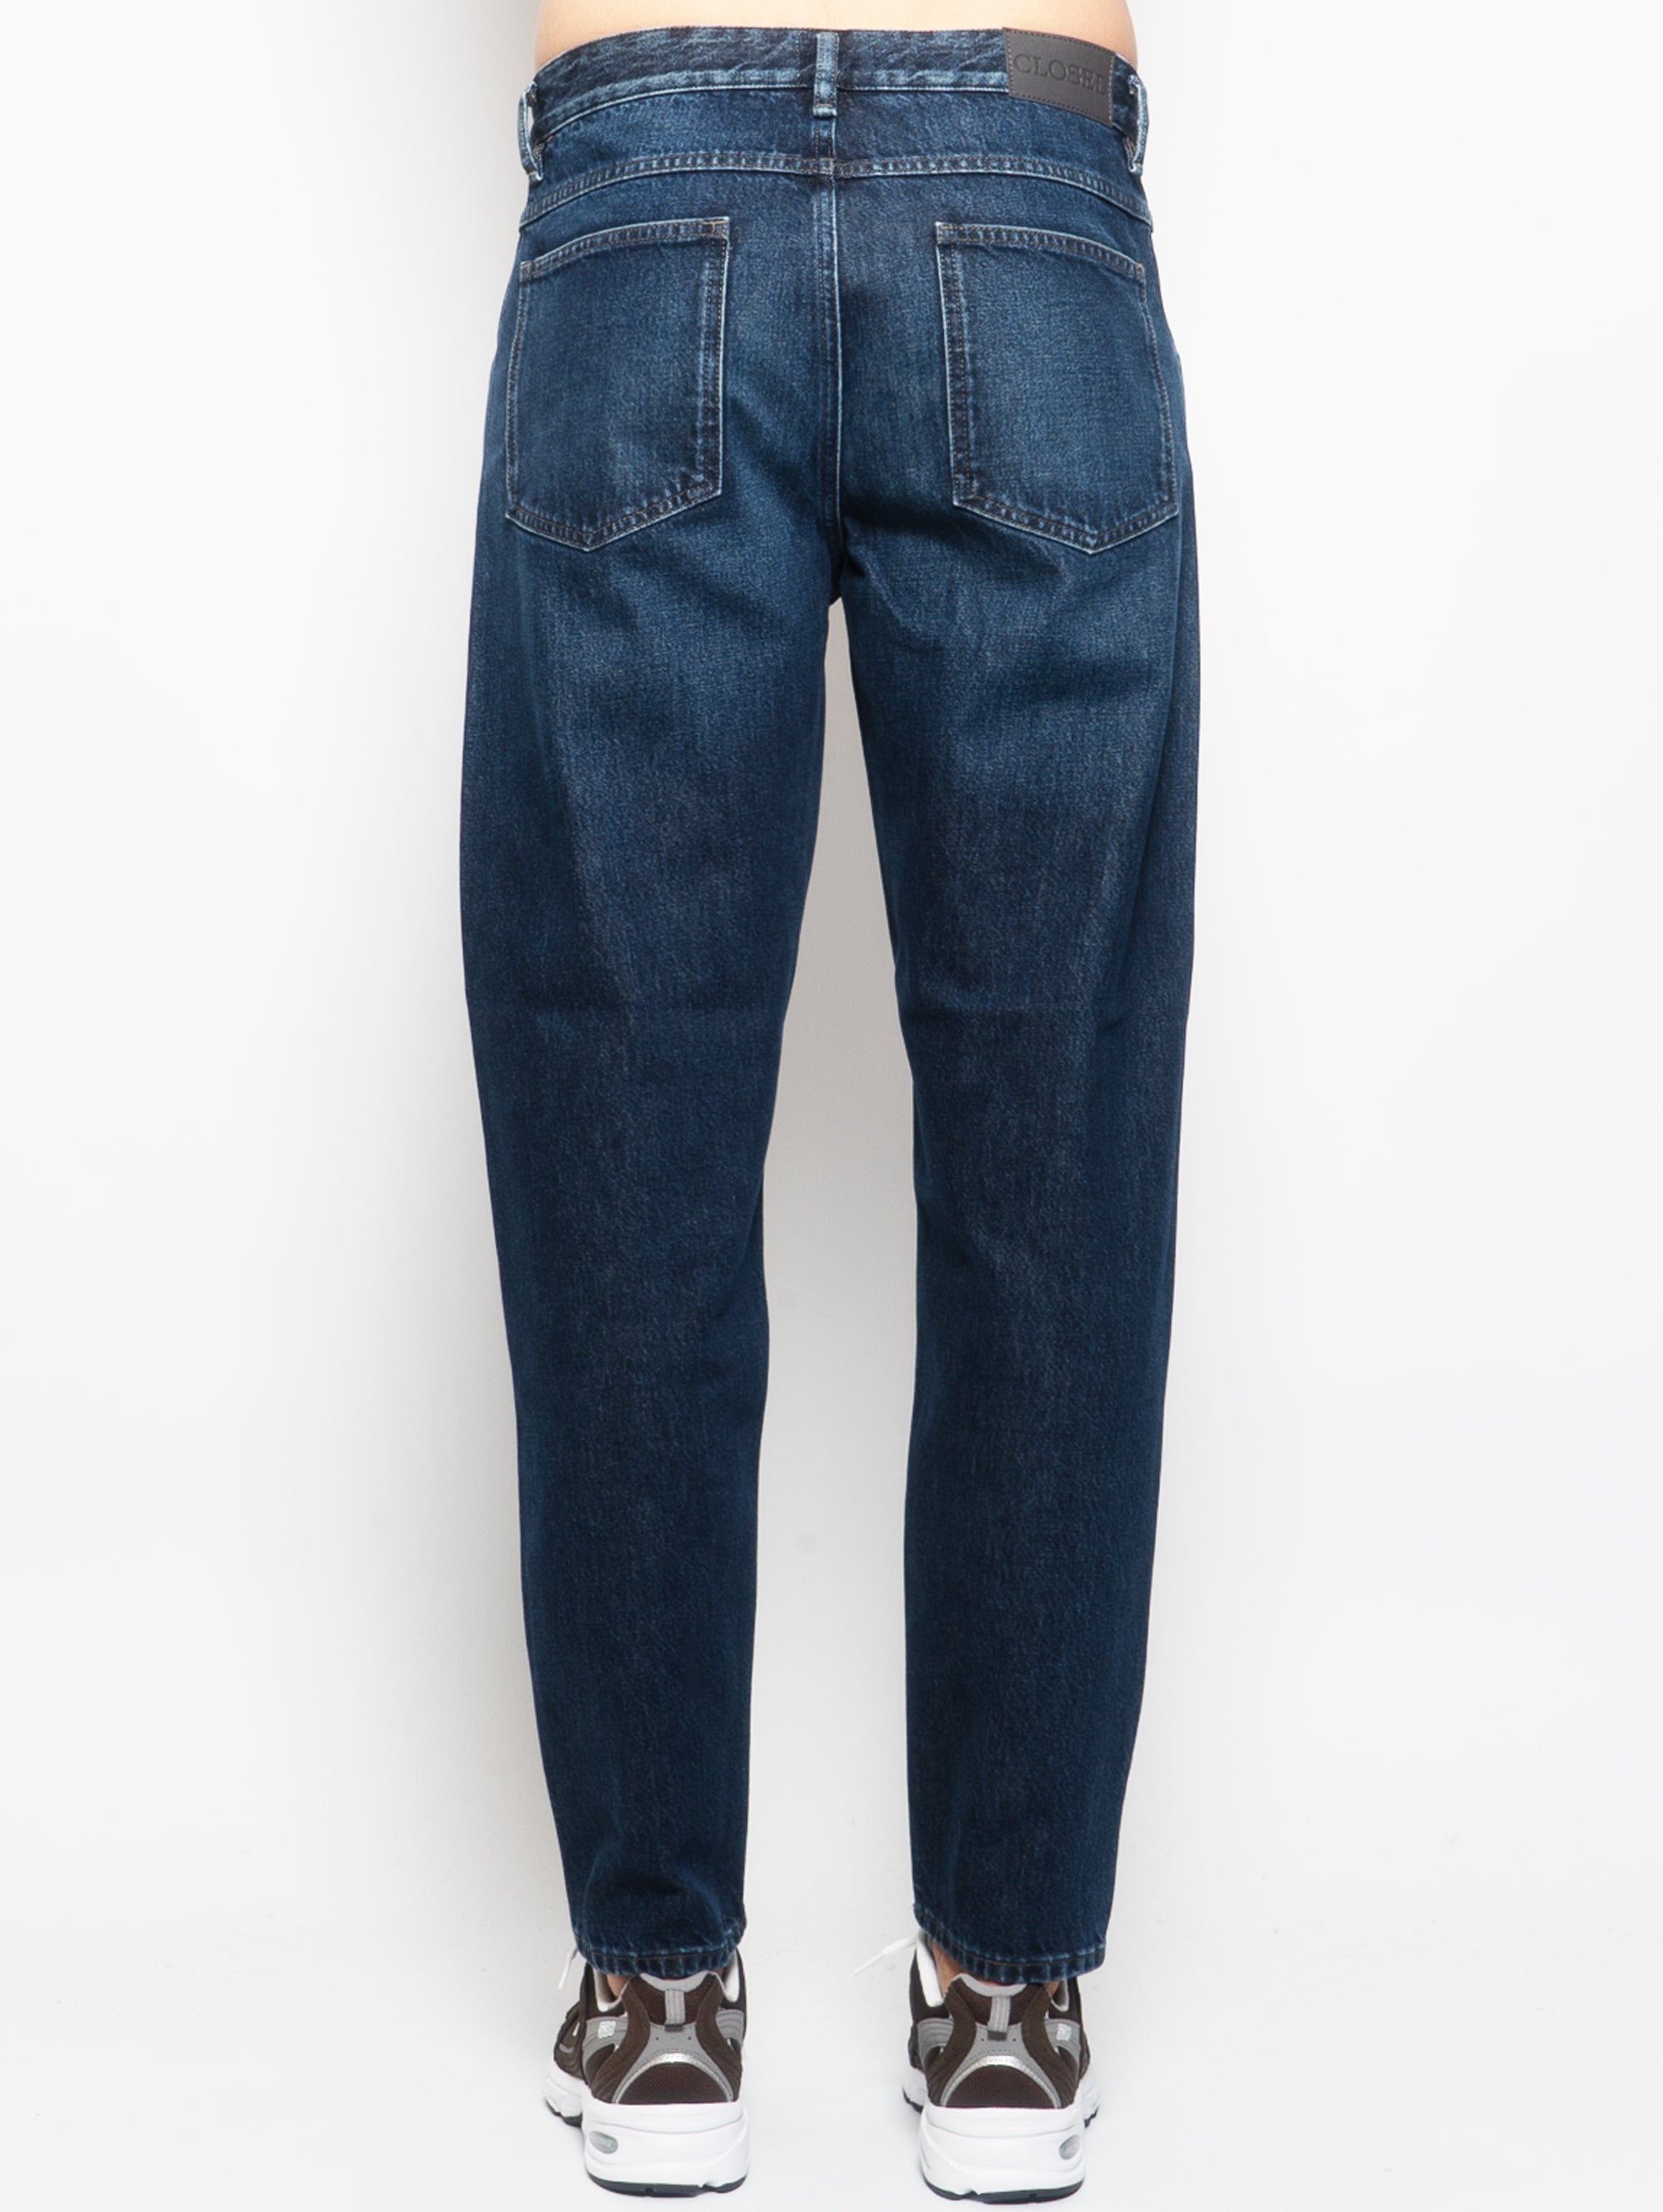 Jeans Relaxed Fit in Cotone Organico Blu